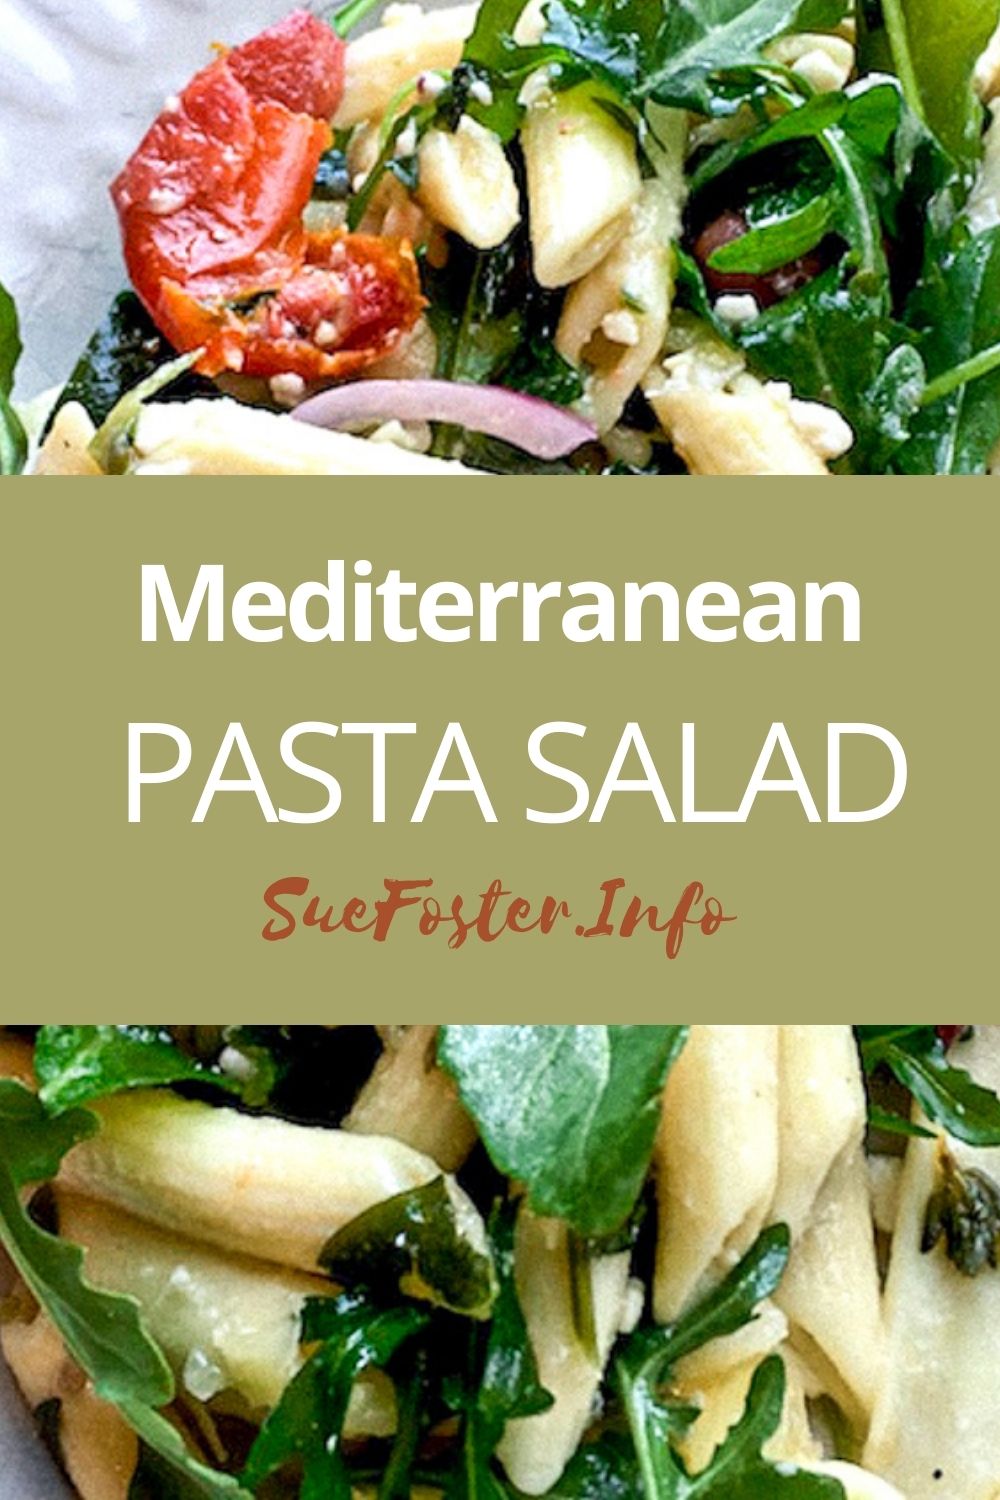 A quick to cook, delicious Mediterranean pasta salad with feta, lemons and kalamata olives that packs a lot of interesting flavours into each bite.